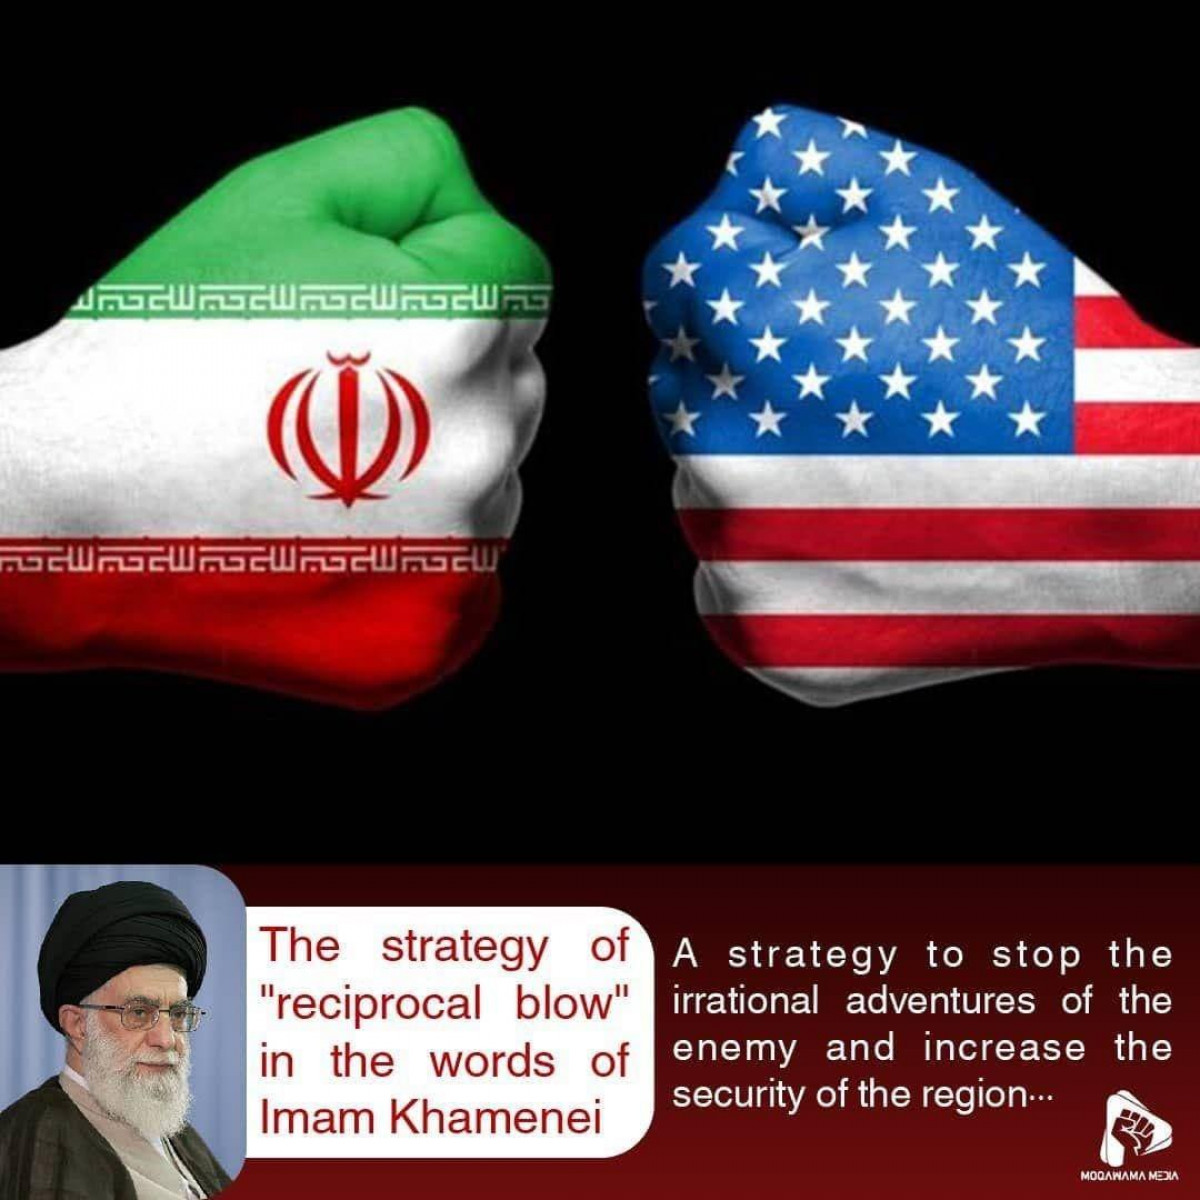 The strategy of "reciprocal blow" in the words of Imam Khamenei